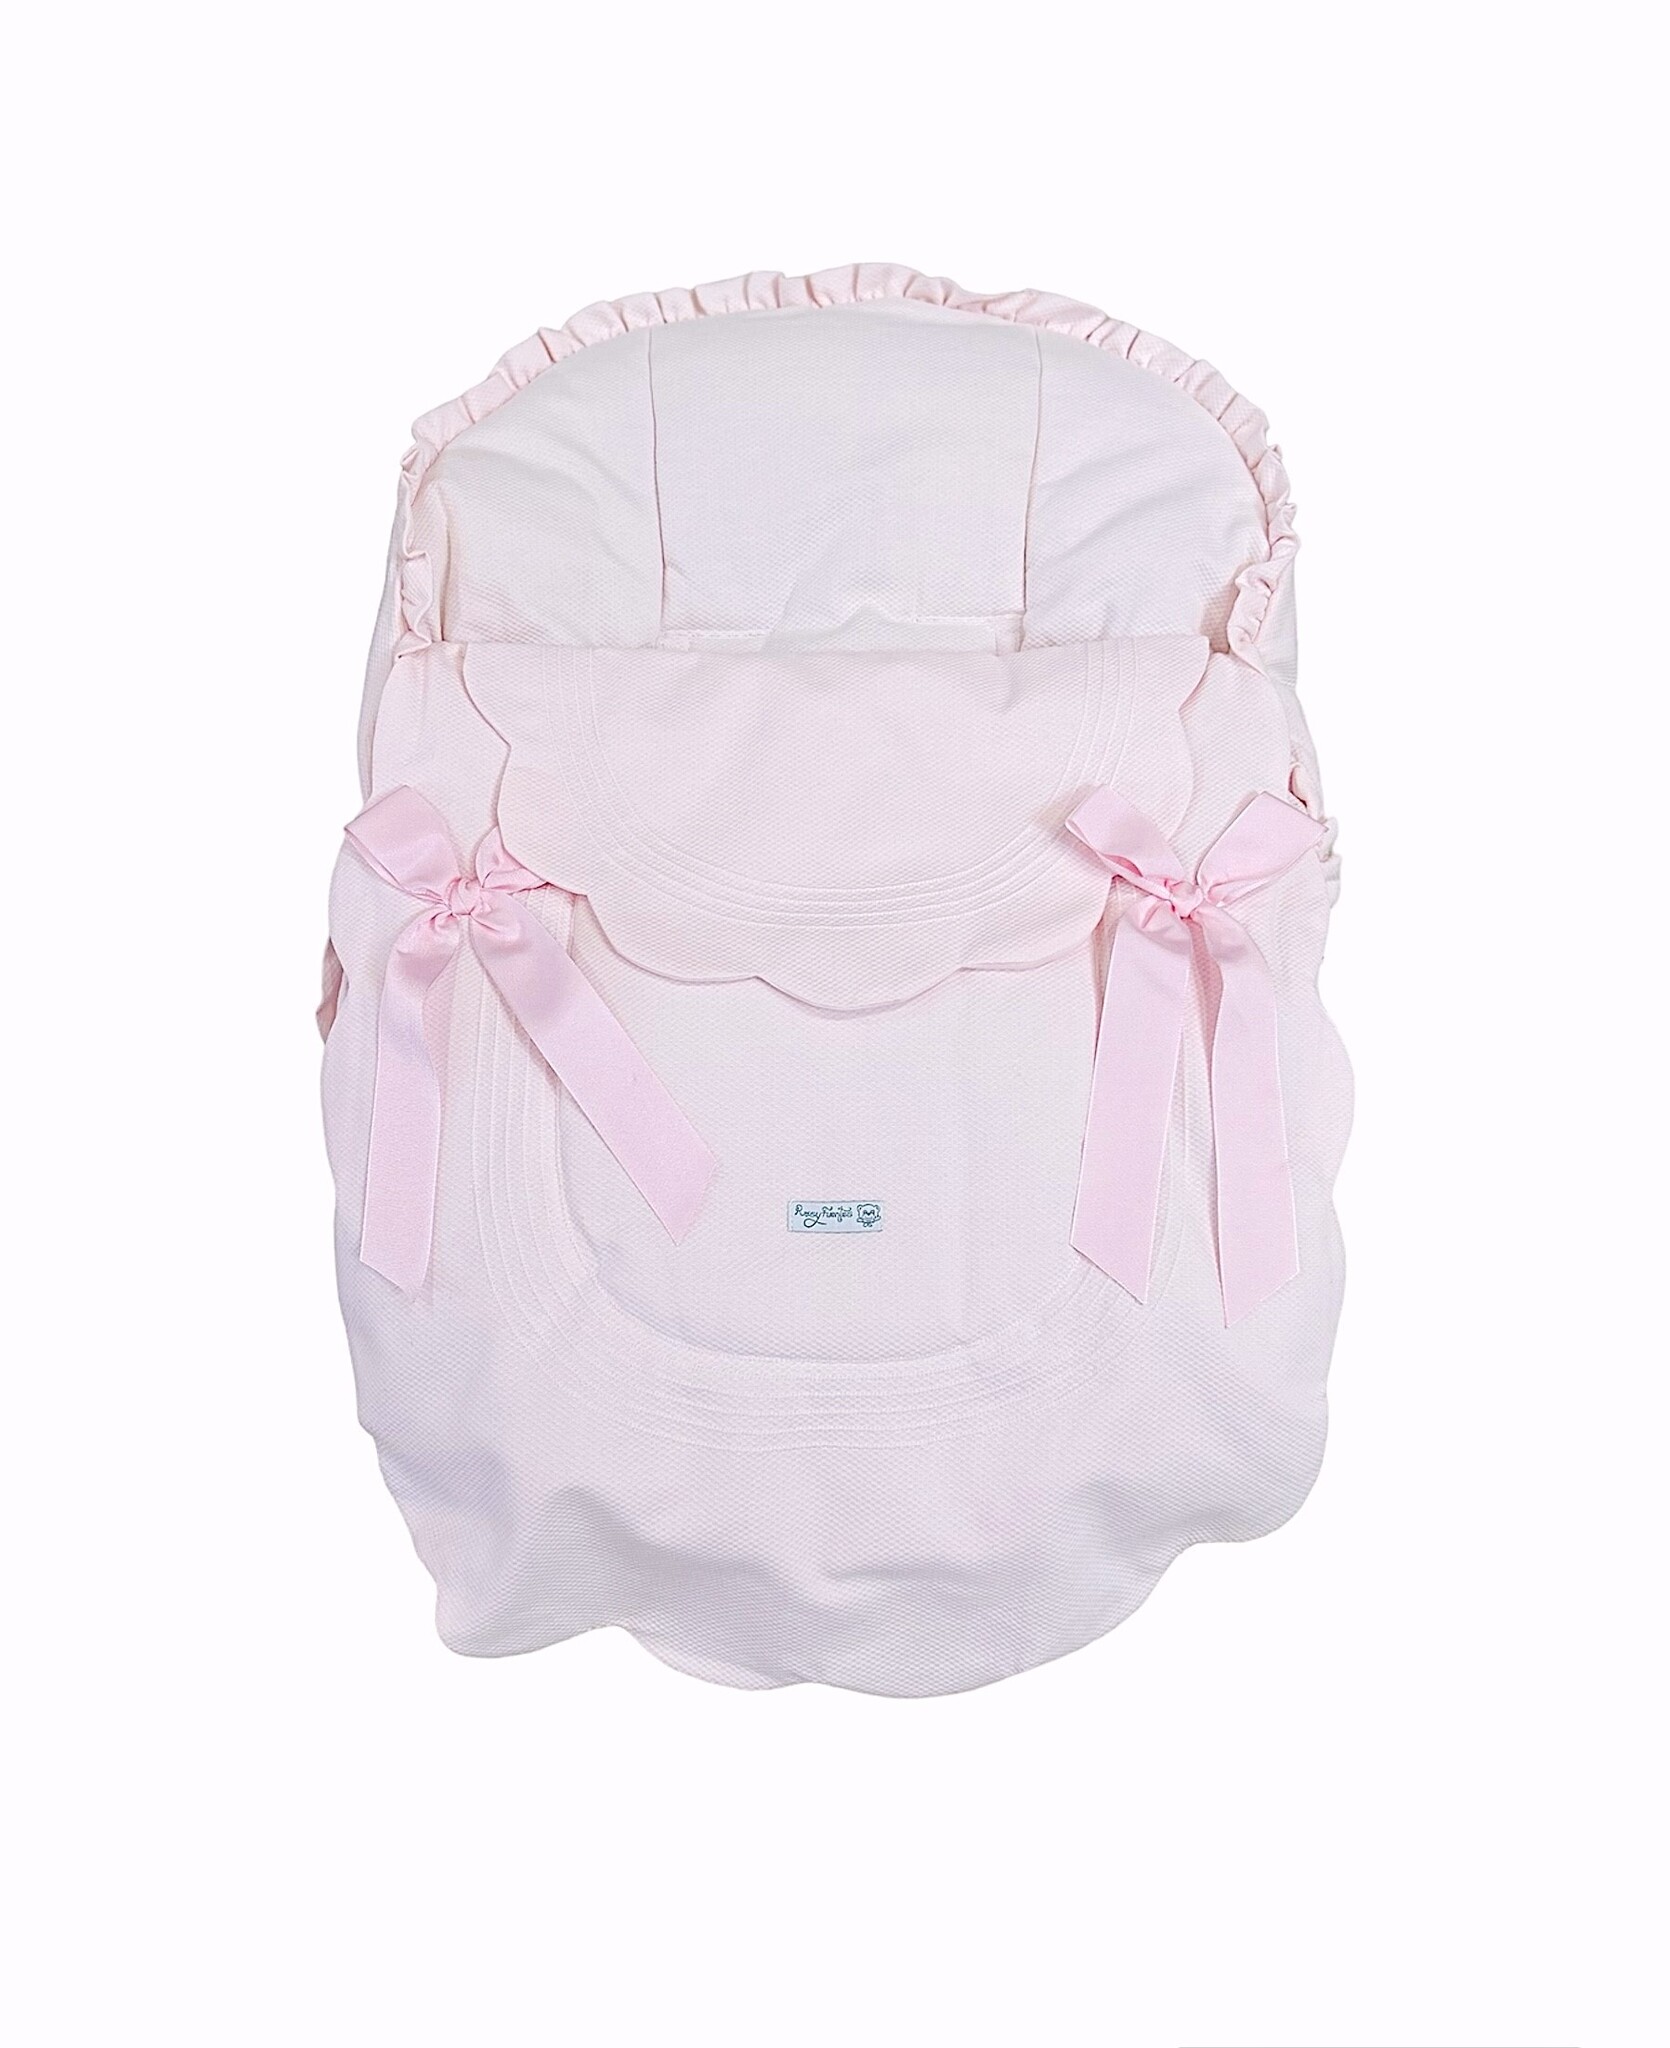 Rosy Fuentes Car Seat Cover - Pink - Bubbles Childrenswear